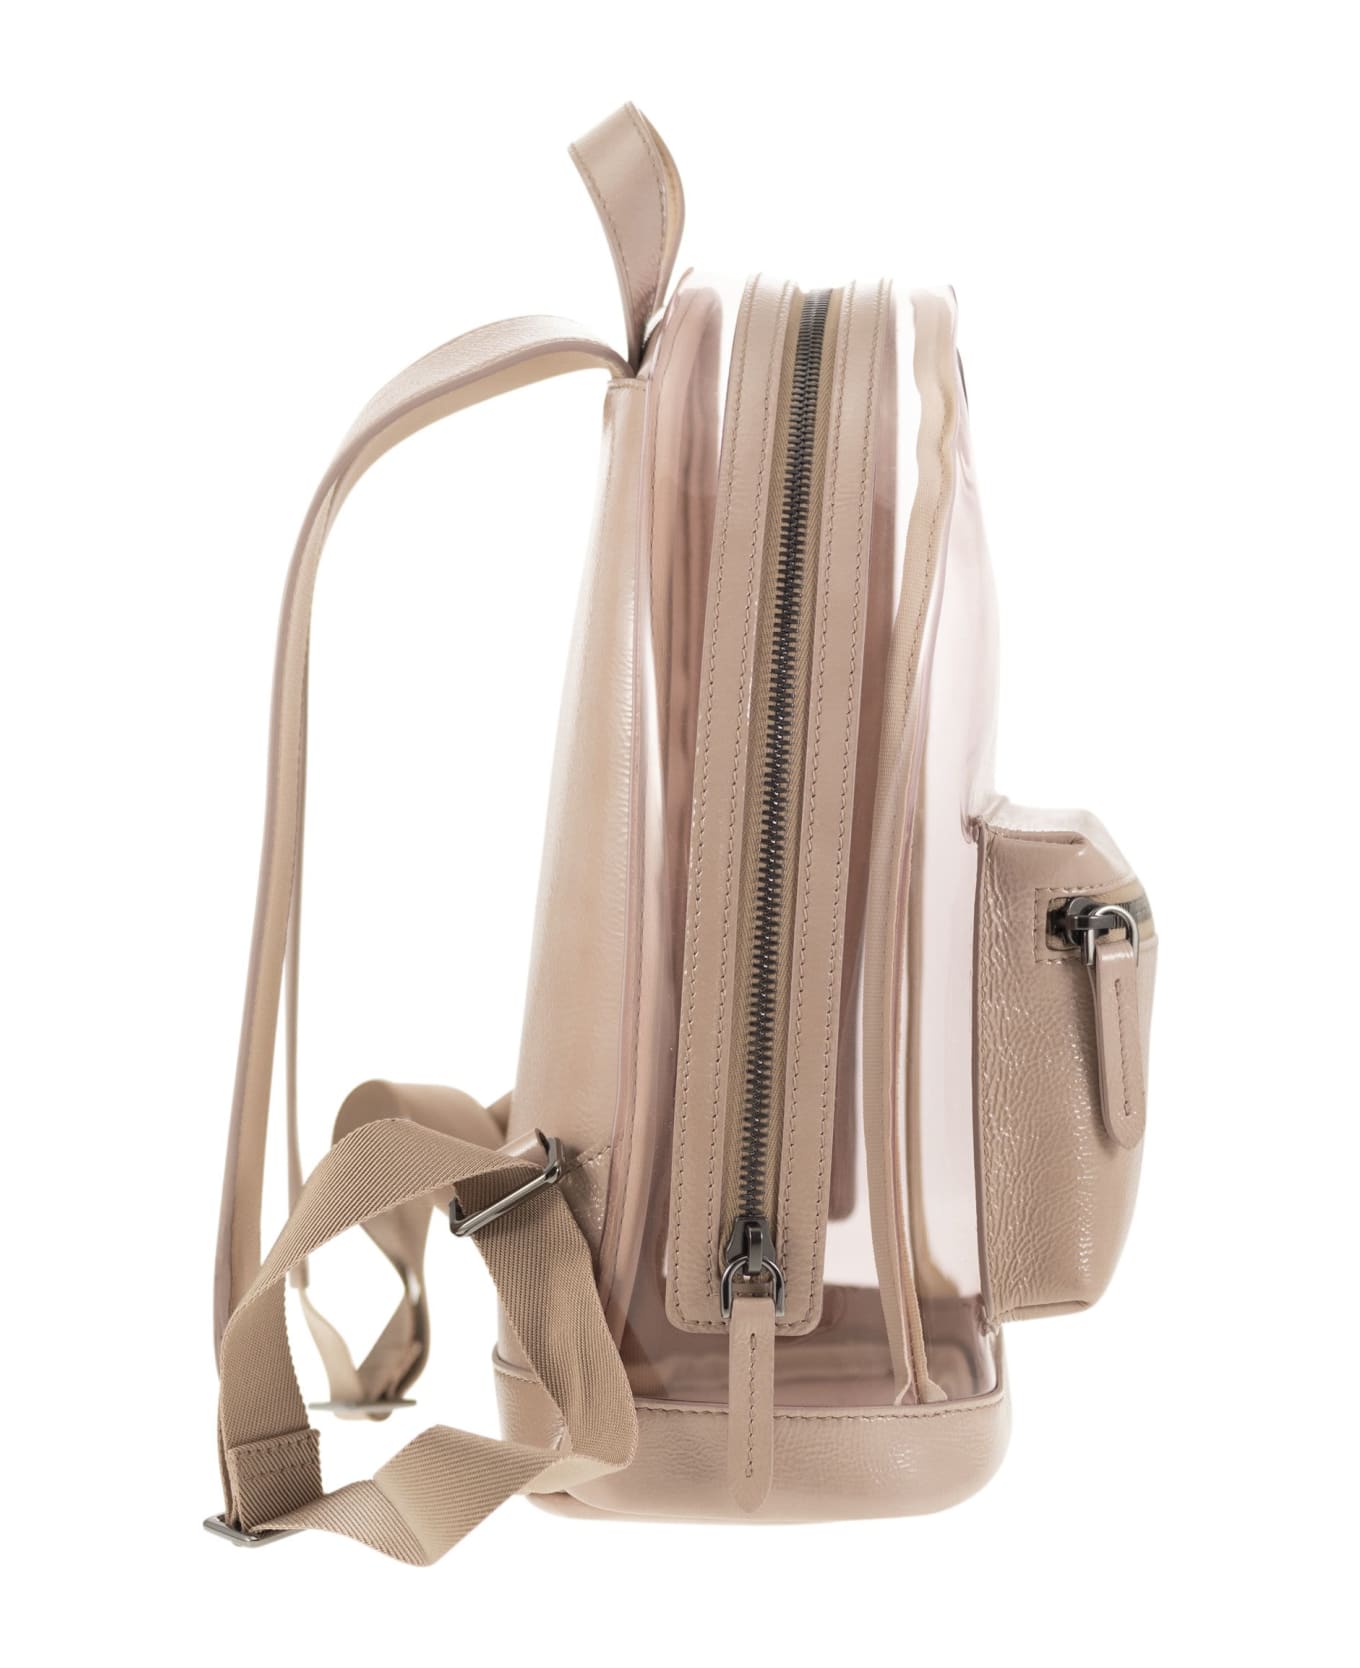 Brunello Cucinelli Sleek Pvc And Leather Backpack - Pink アクセサリー＆ギフト